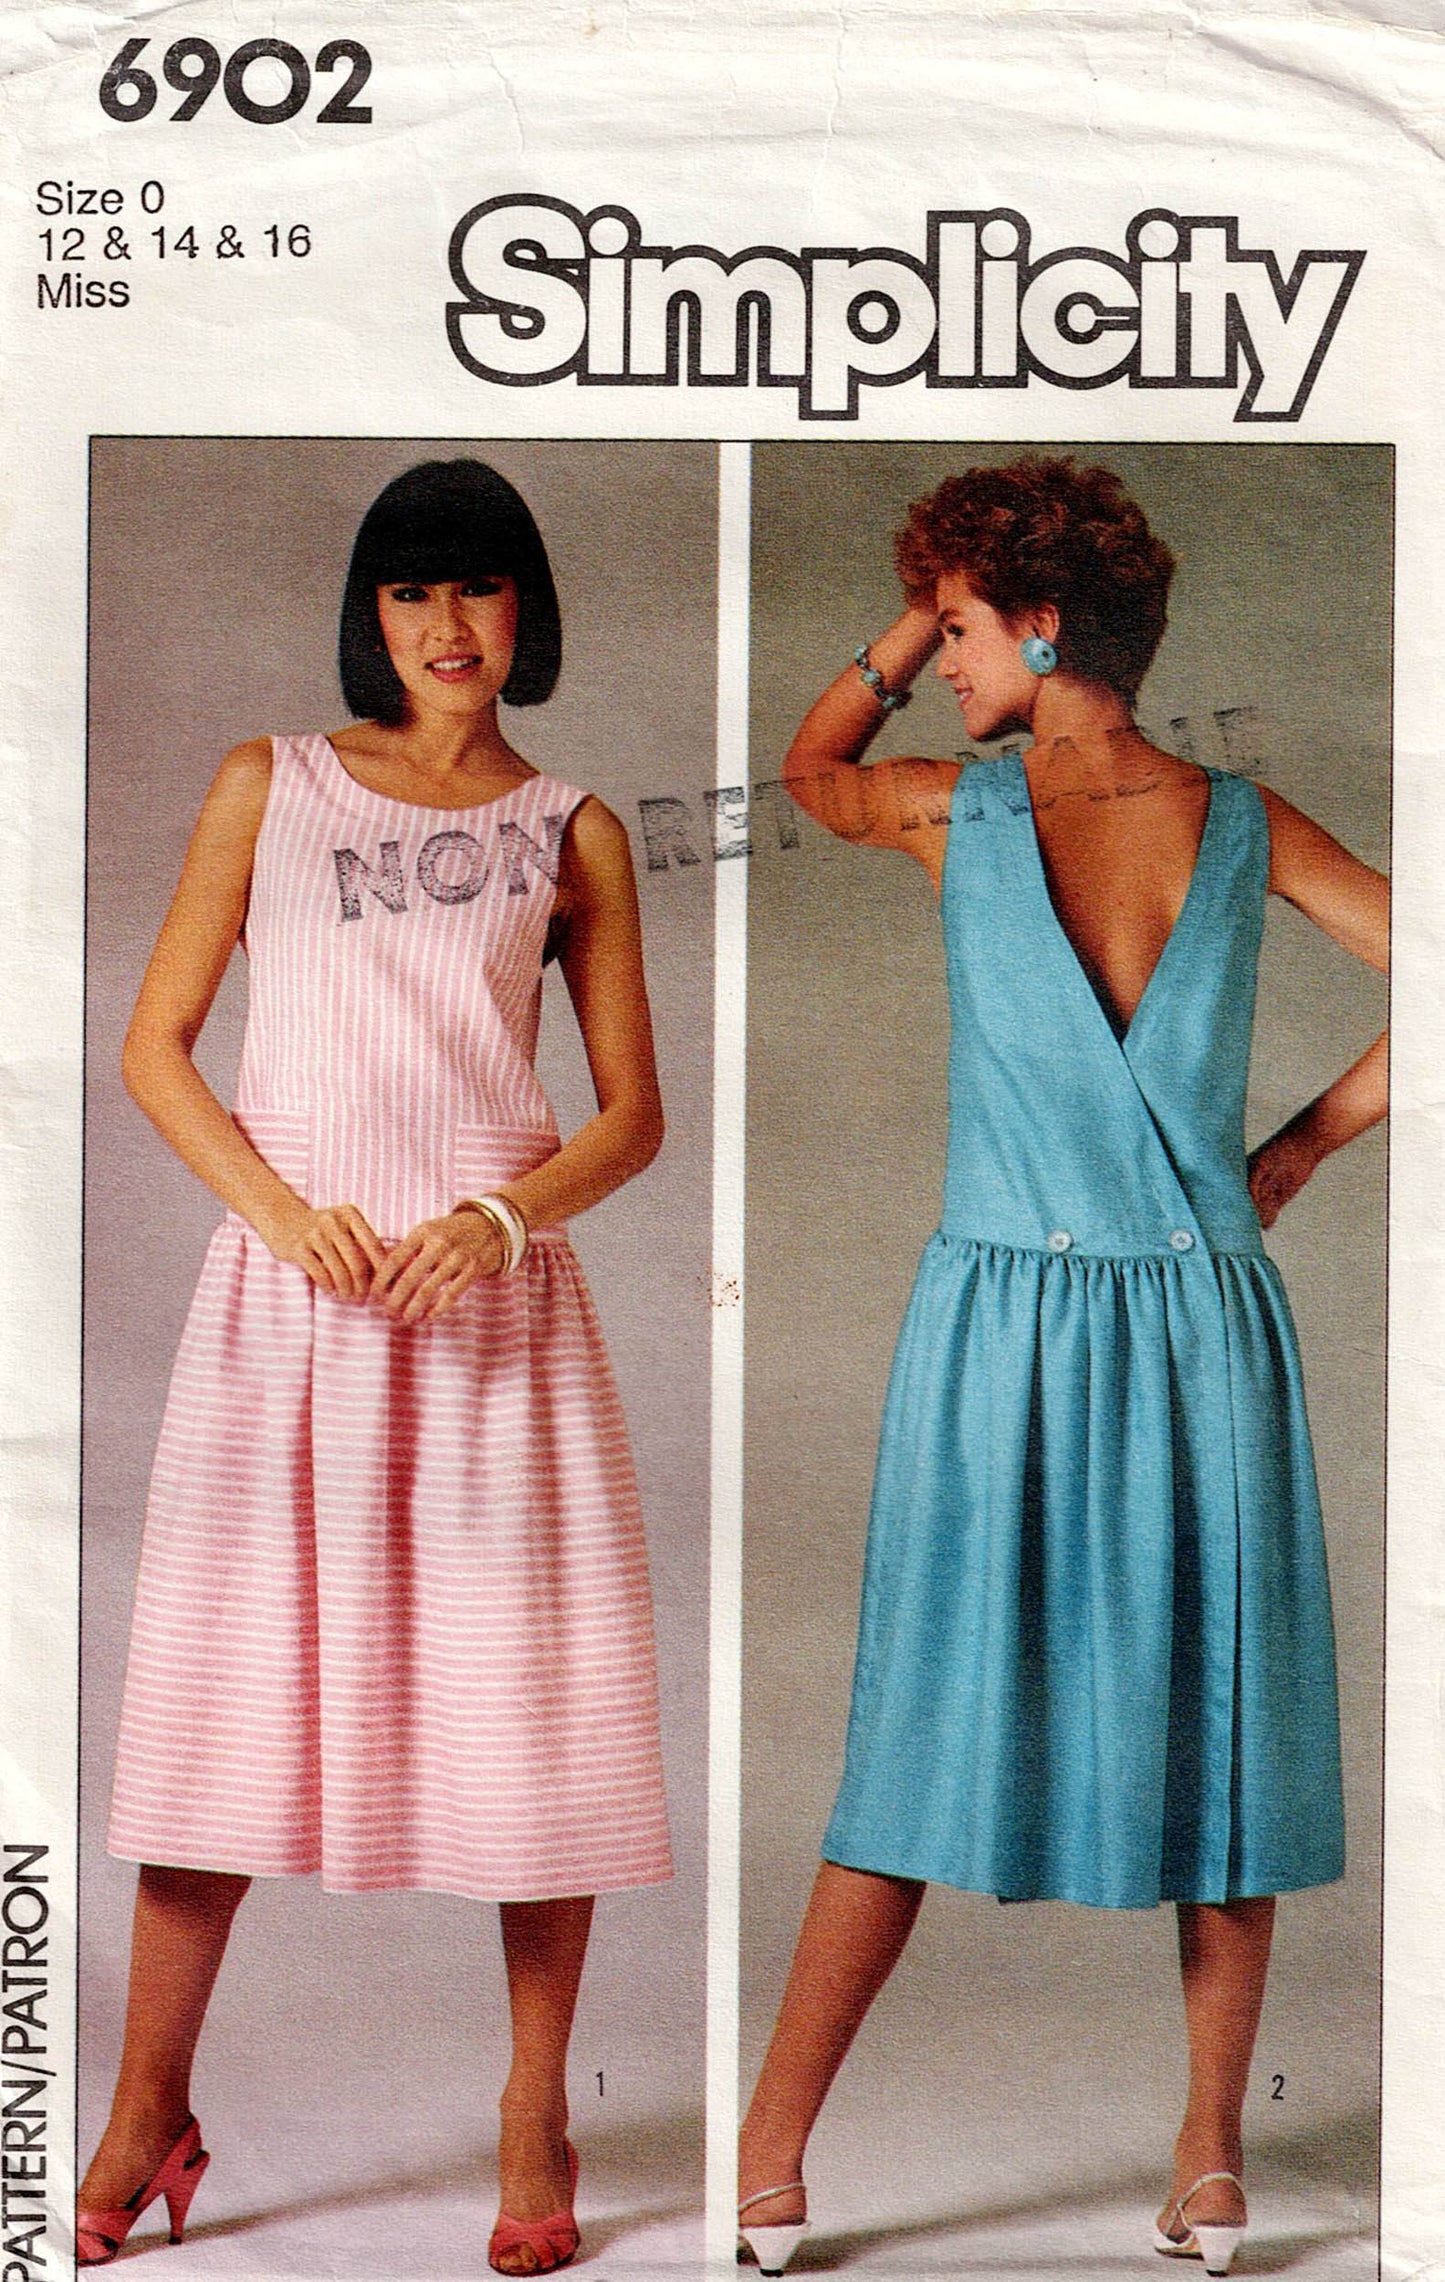 Simplicity 6902 Womens Back Wrap Dress 1980s Vintage Sewing Pattern Size 10 or 12 - 16 UNCUT Factory Folded